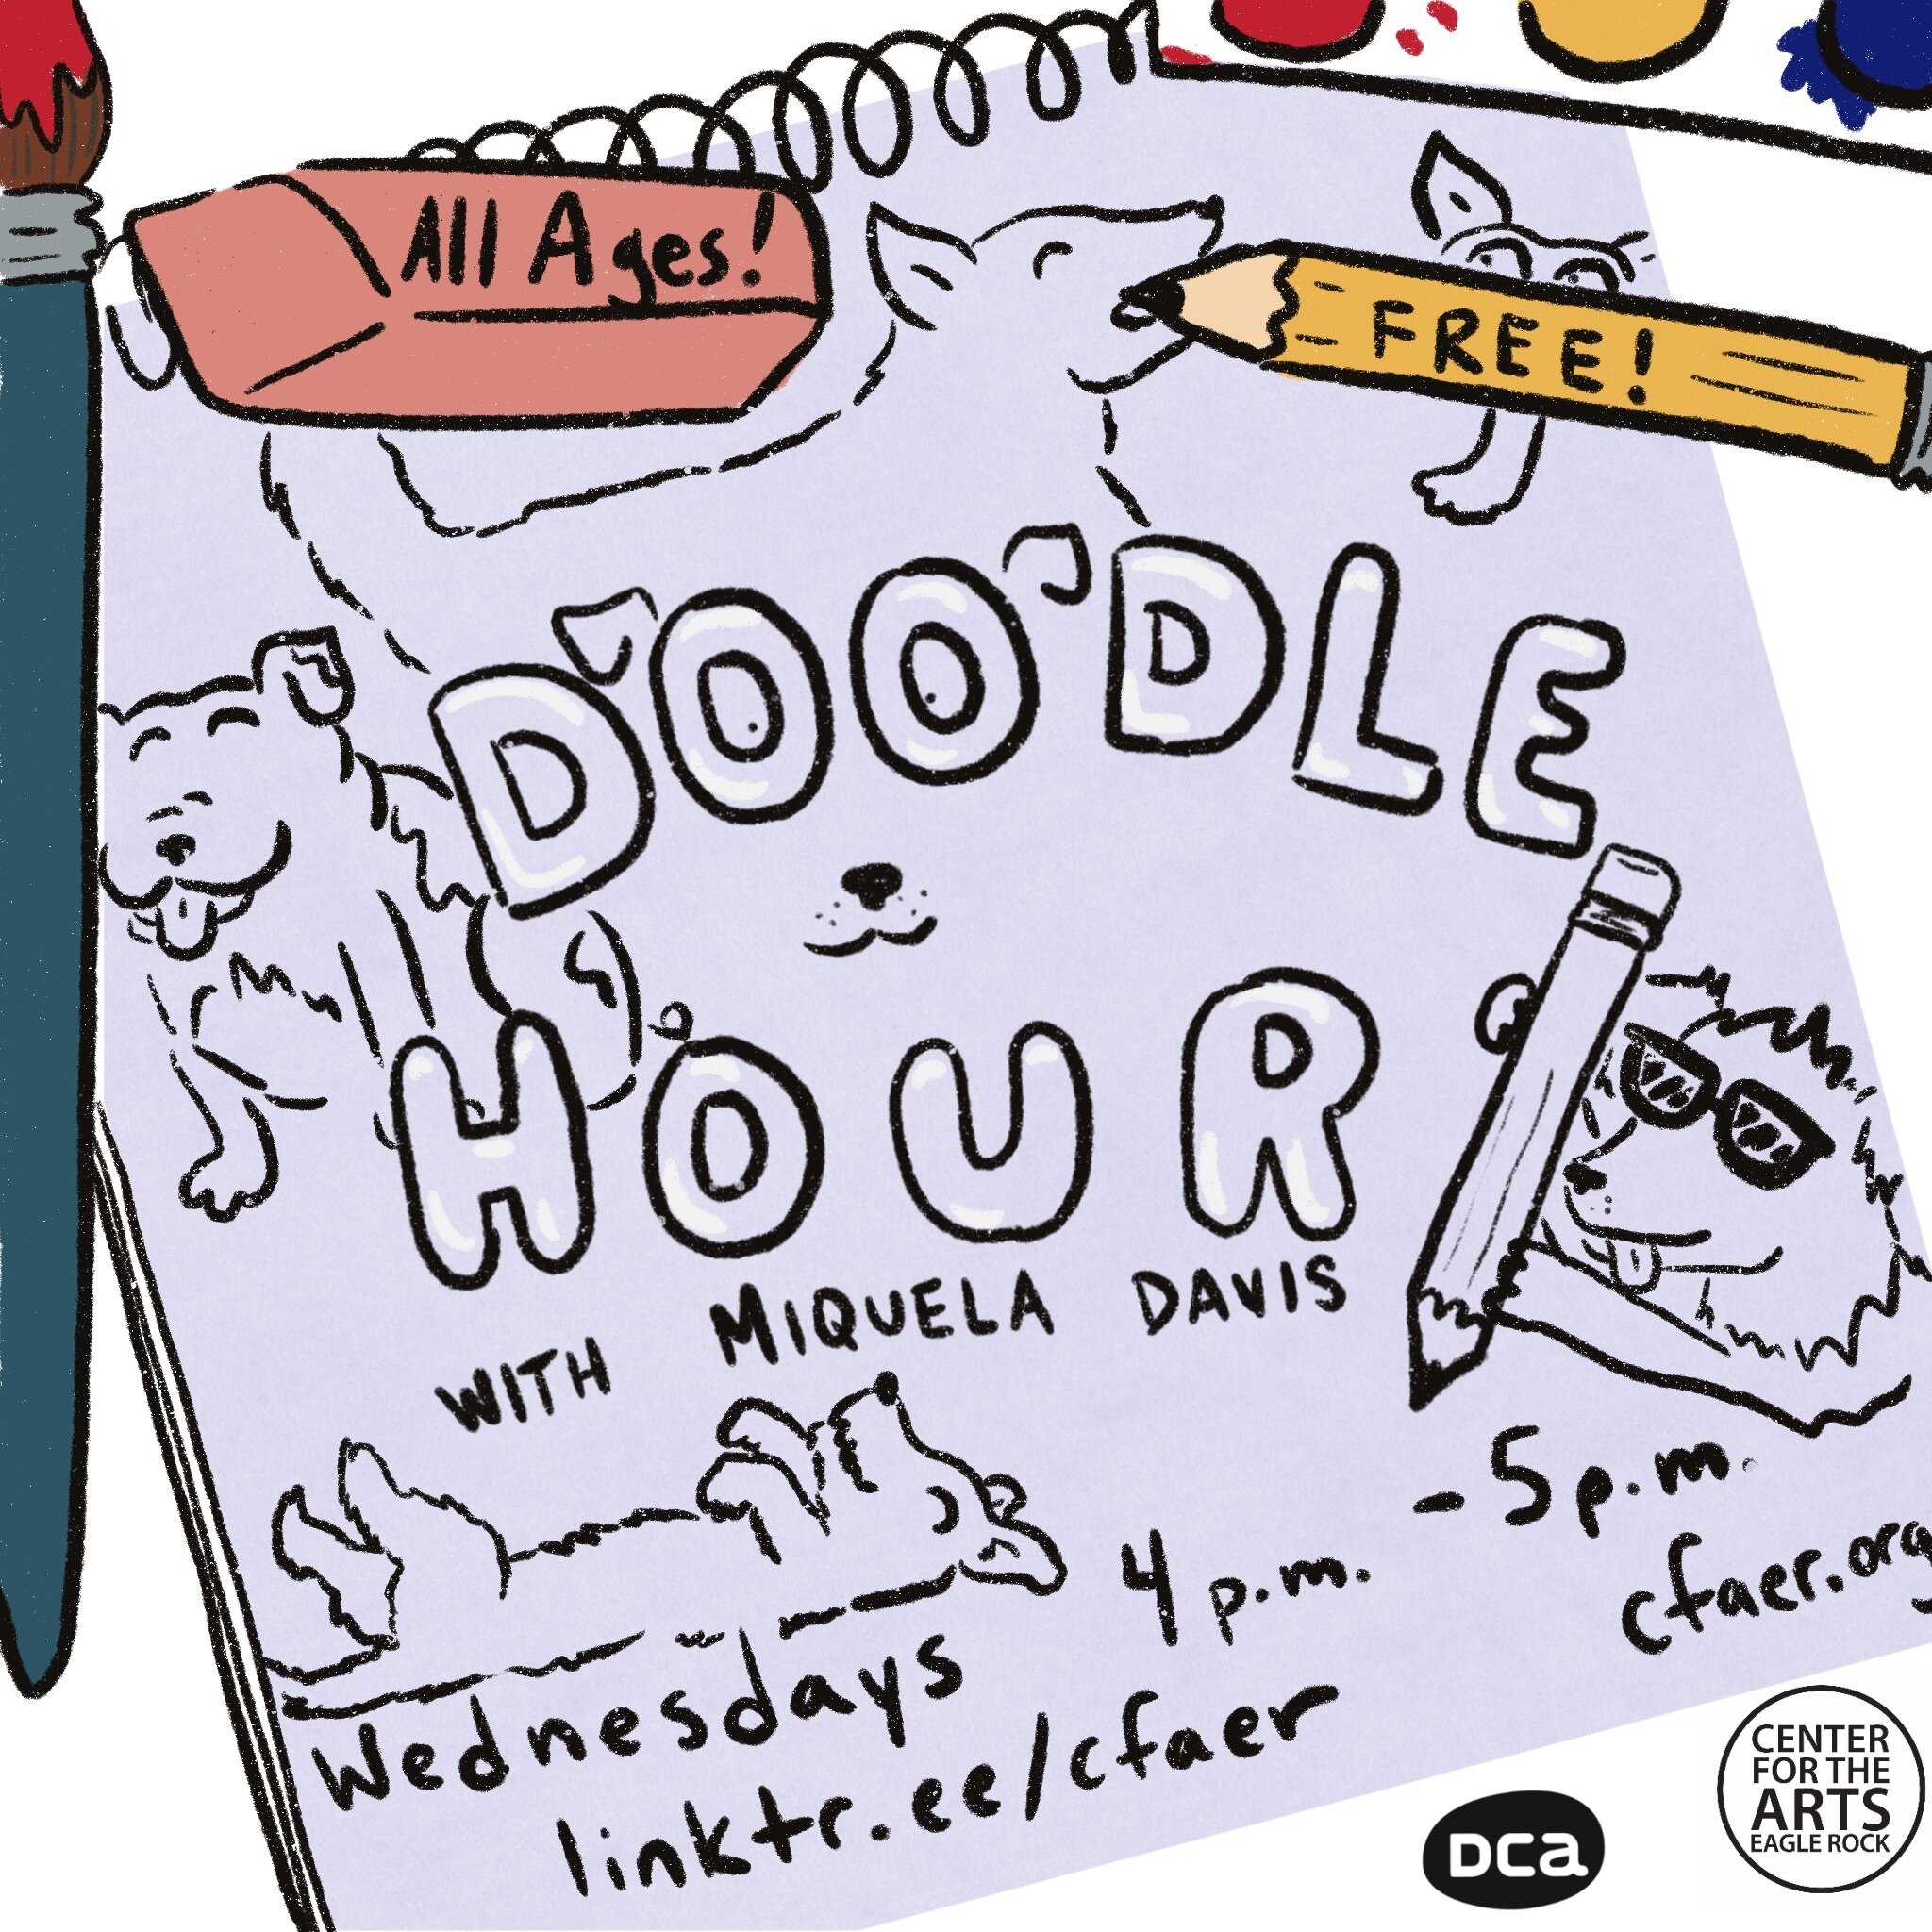 Doodle Hour - on Zoom with Miquela DavisWednesdays: 4 - 5pmAll ages & free!Join artist Miquela Davis for an hour of doodling every Wednesday from 4 to 5pm, free!